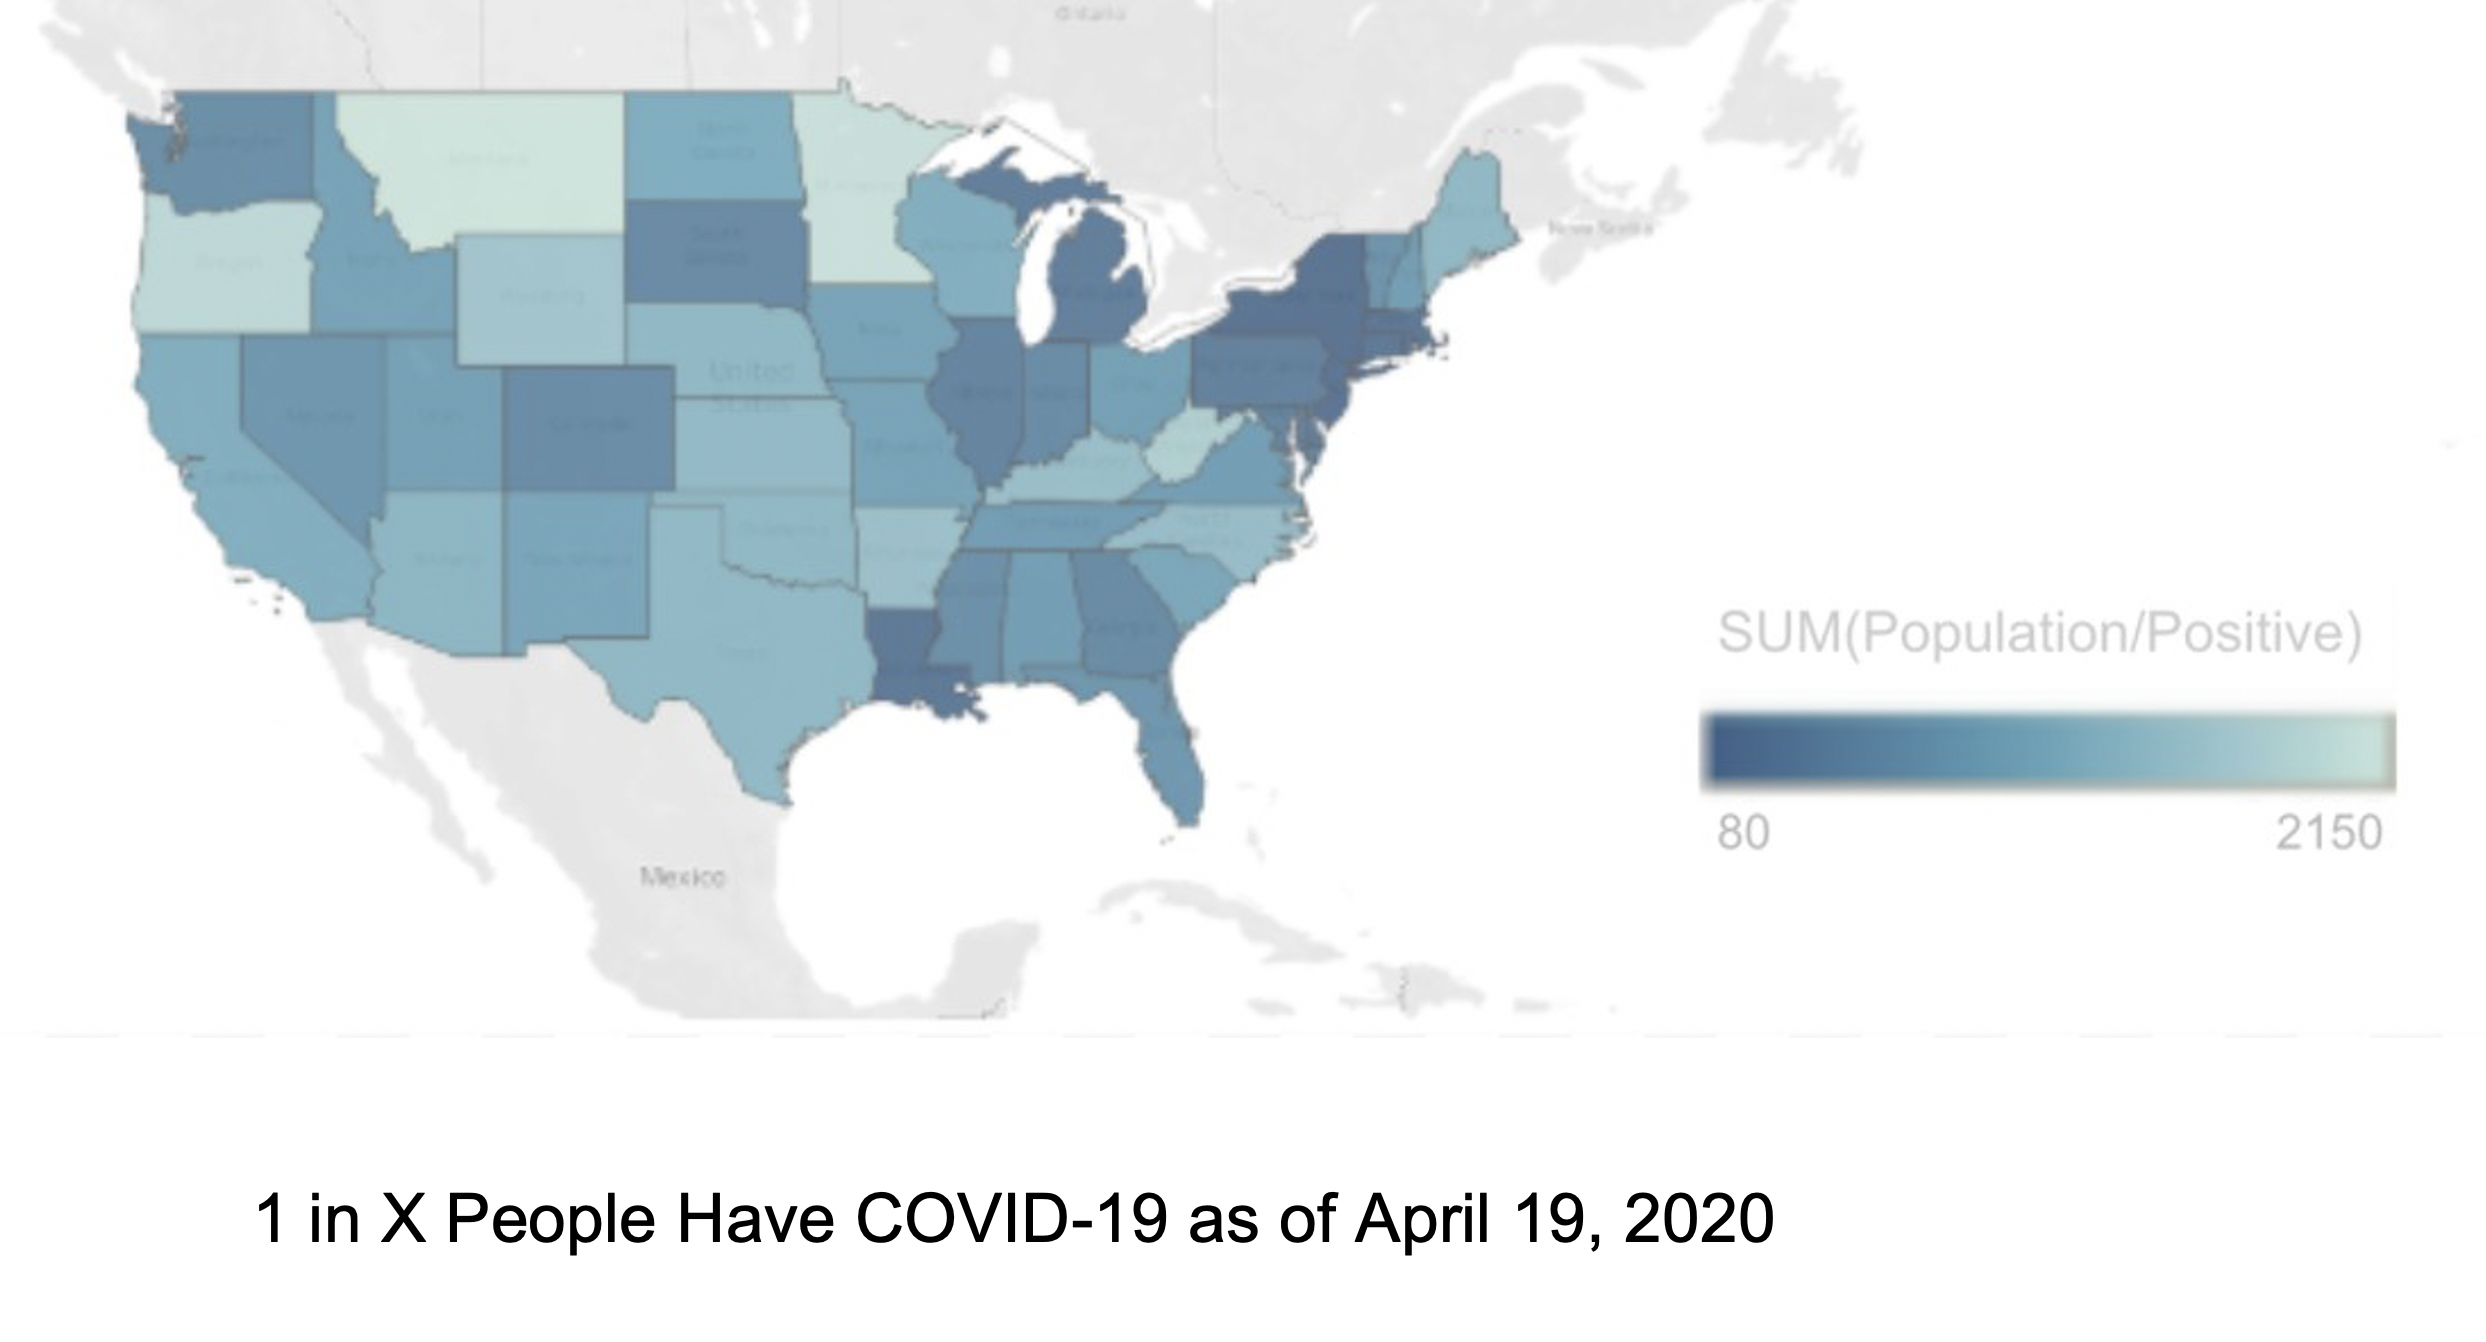 One on X people have COVID-19, as of 19th April 2020 in the USA.